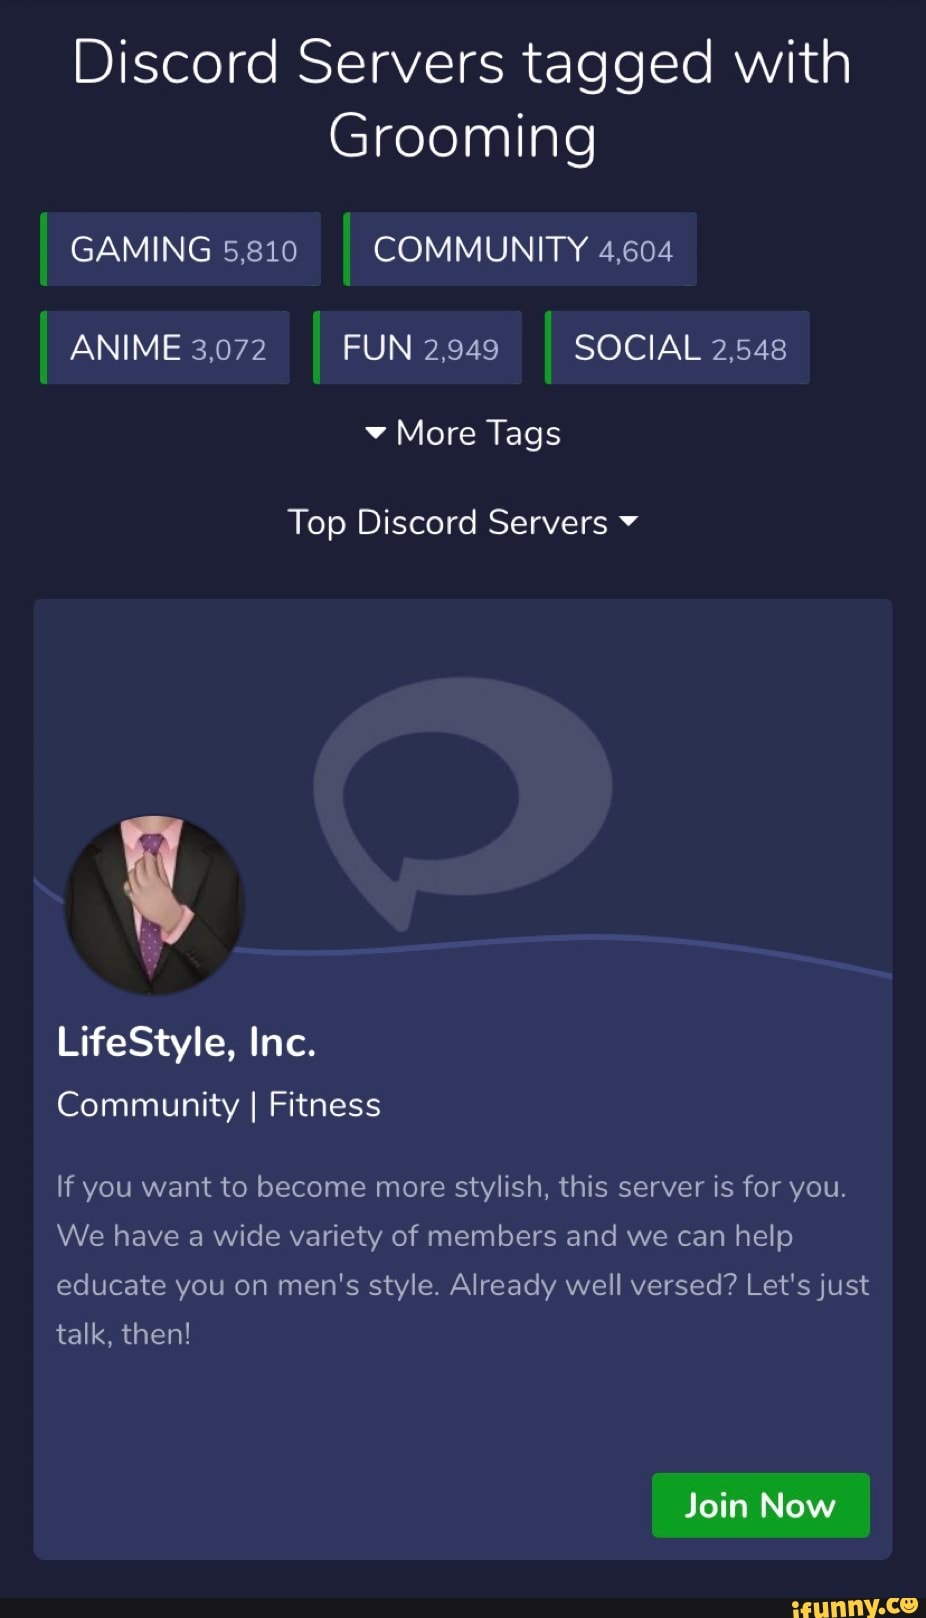 Discord servers tagged with social